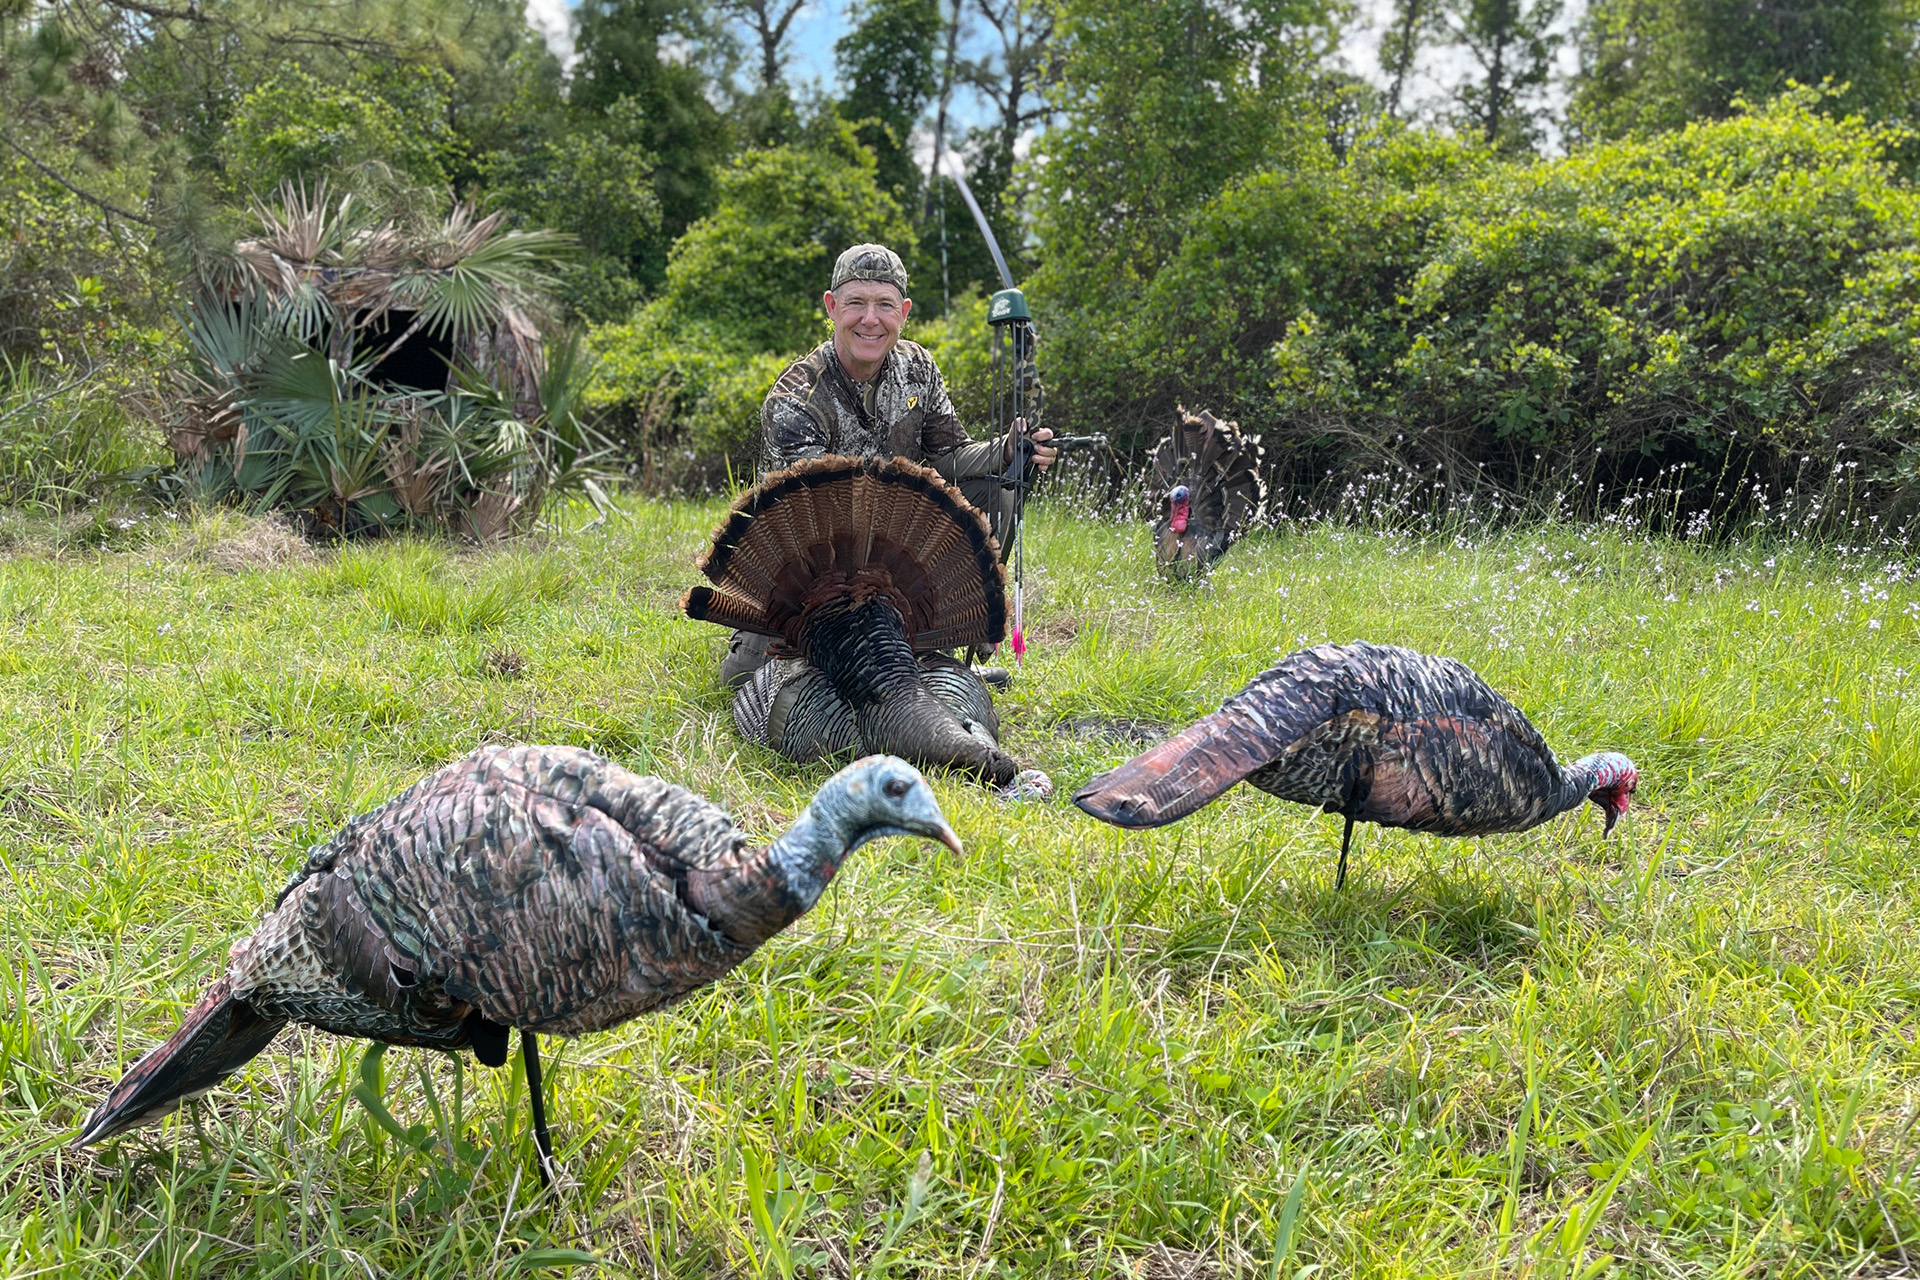 To find the best spot to turkey hunt this spring, let’s take a look at what triggers each species to begin breeding, when and where.